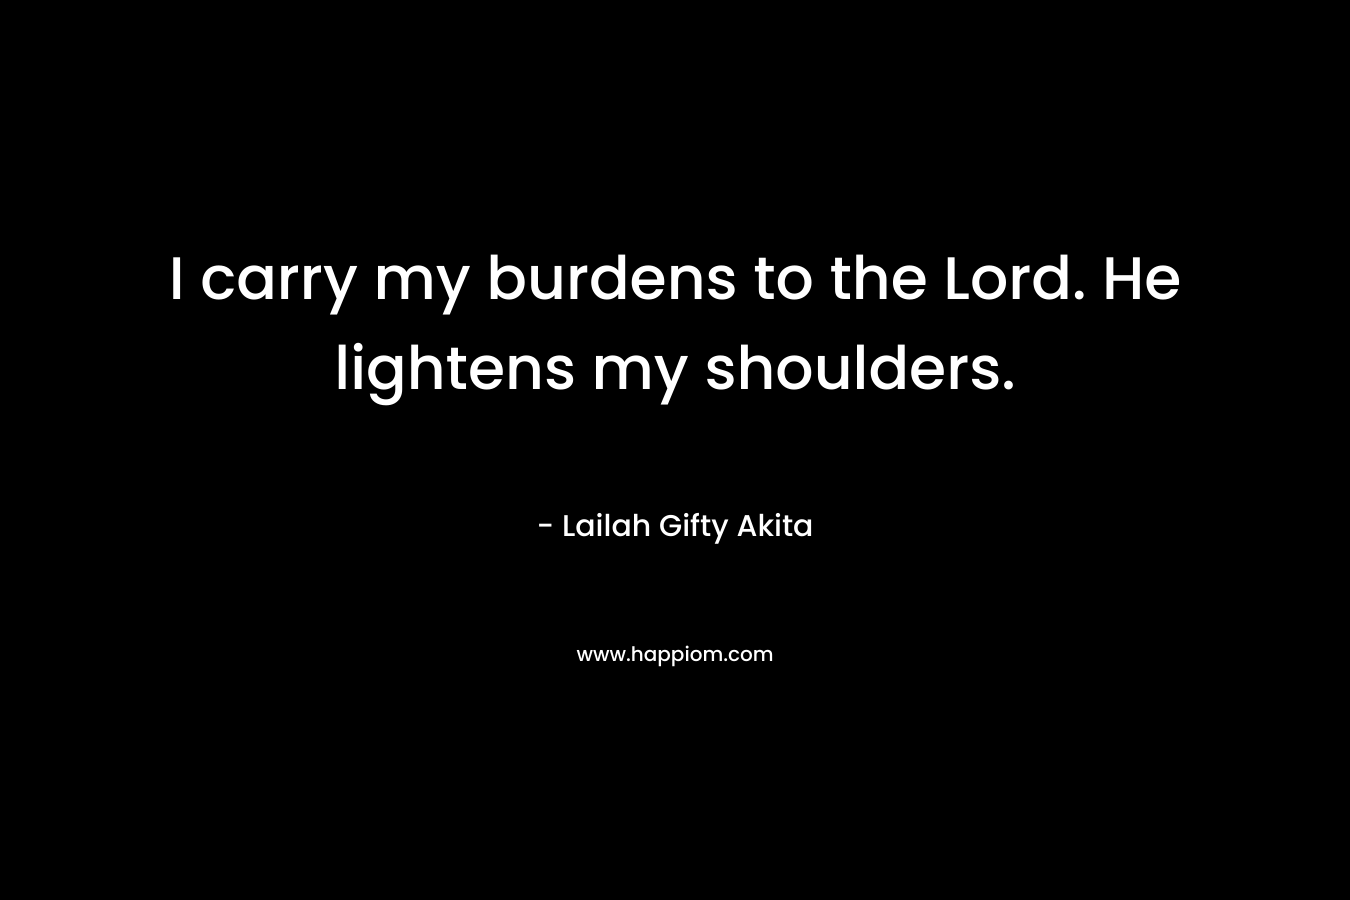 I carry my burdens to the Lord. He lightens my shoulders. – Lailah Gifty Akita